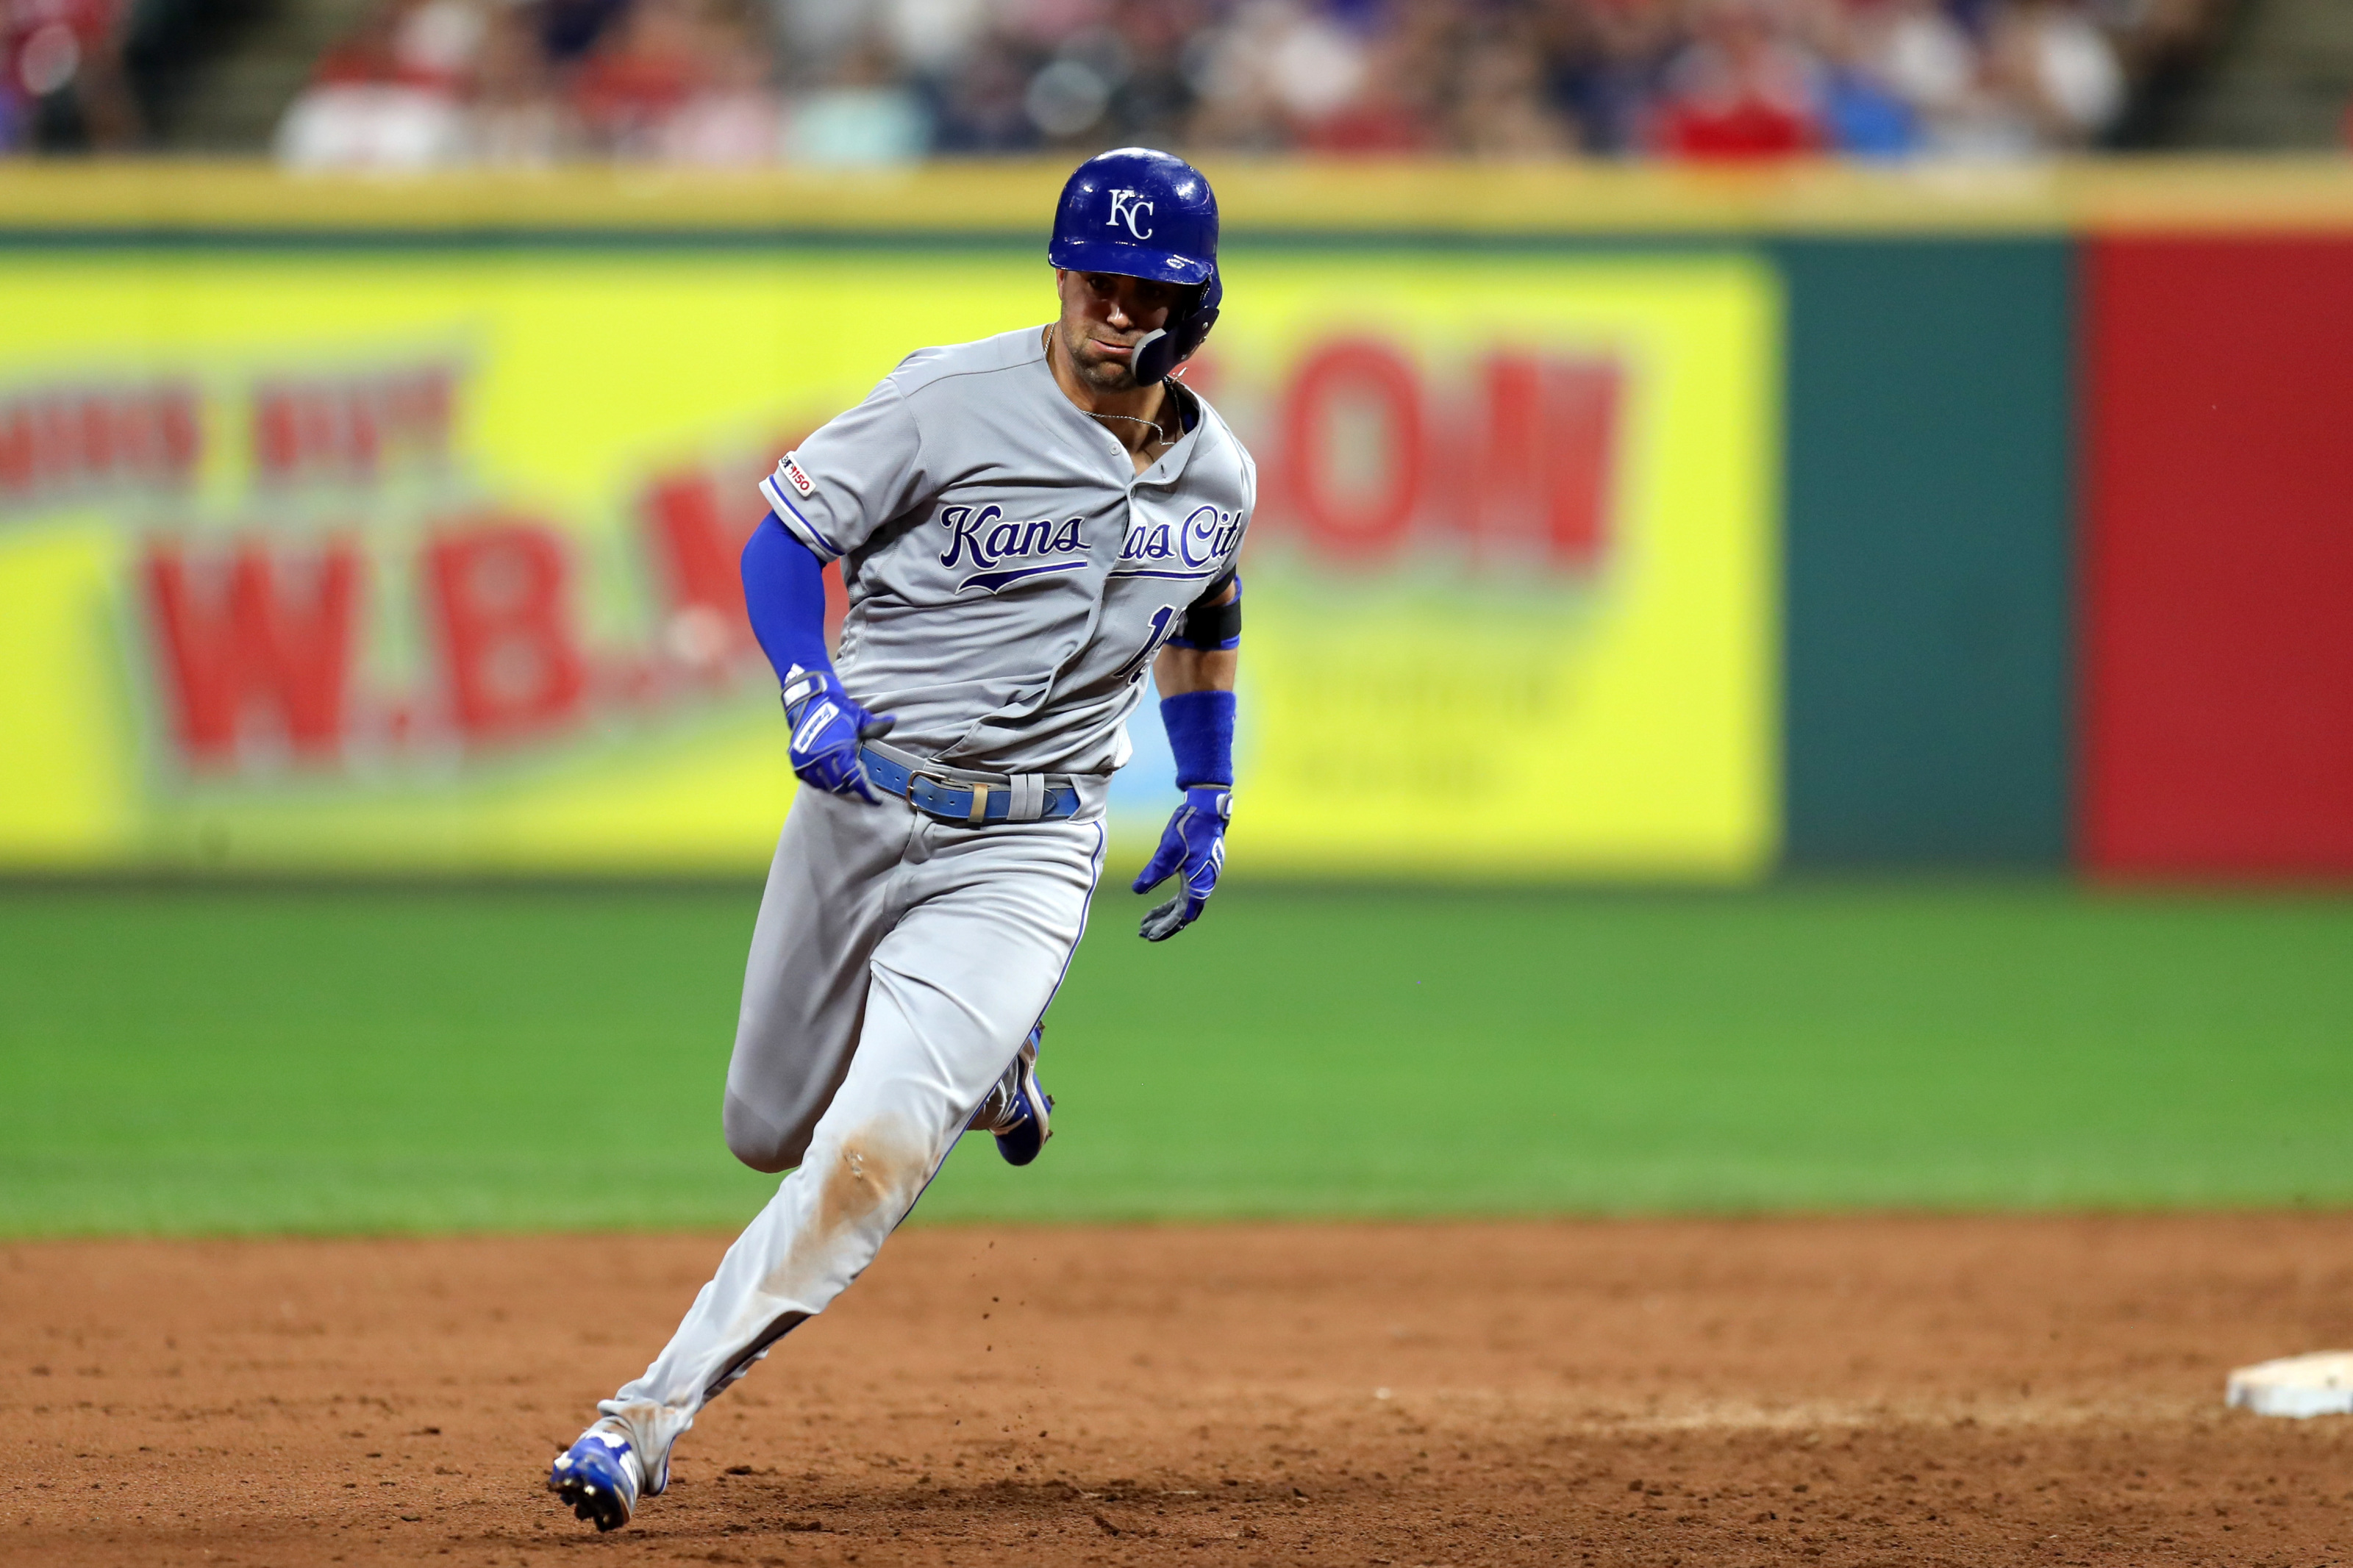 Whit Merrifield had long journey to making Royals' major-league